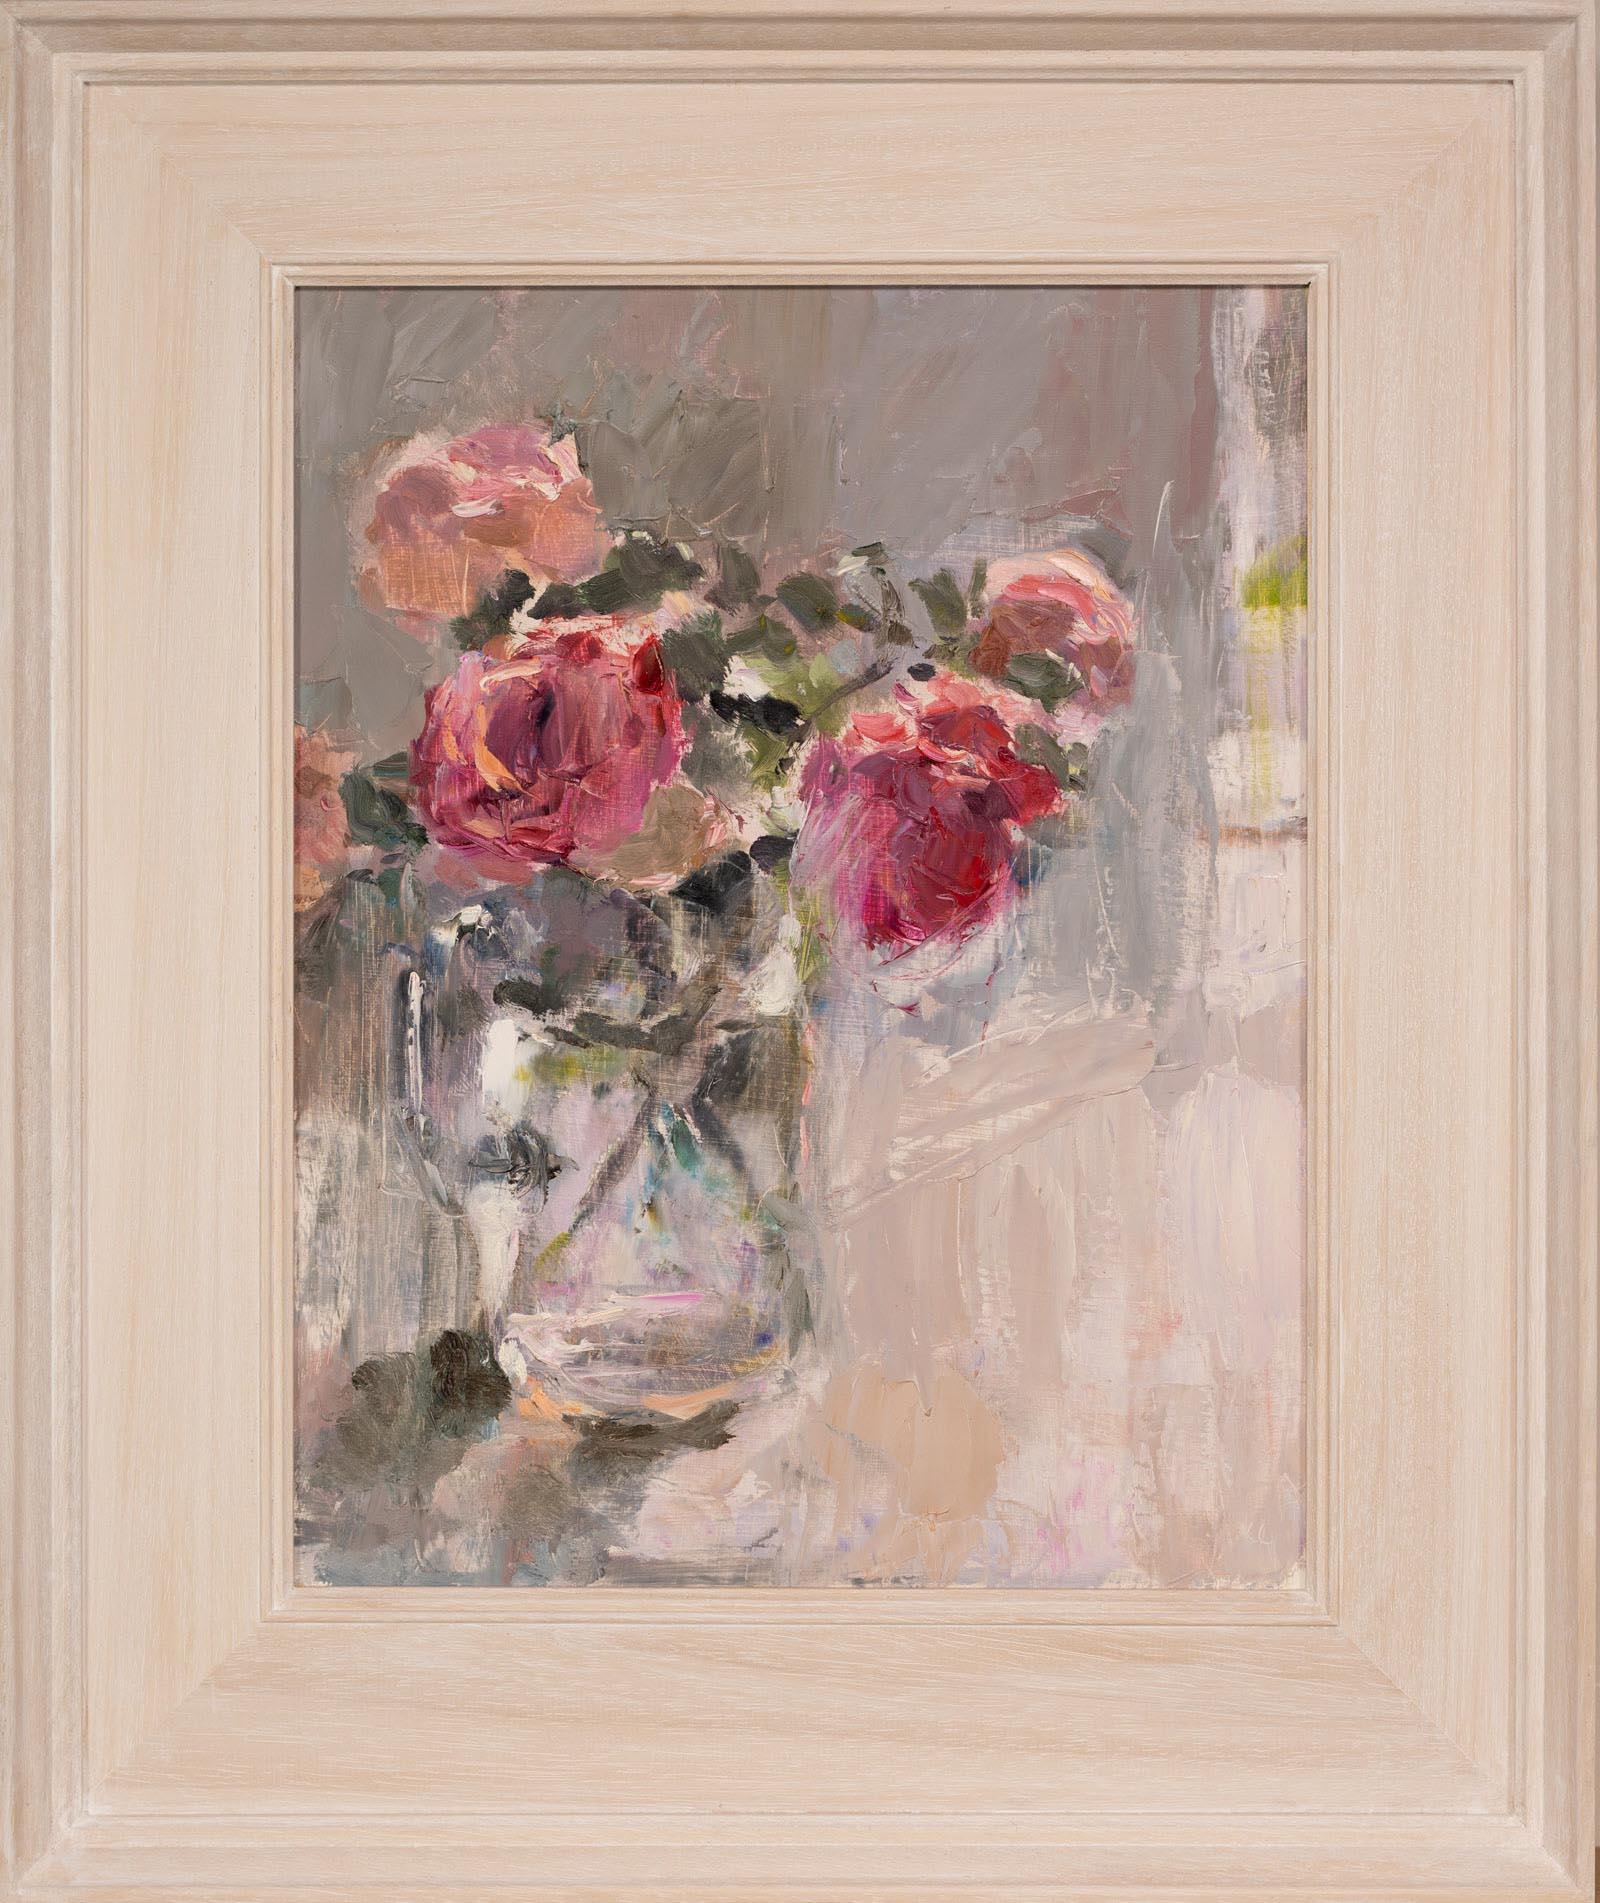 Roses in a glass jug 2, an original still life oil painting - Painting by Lynne Cartlidge